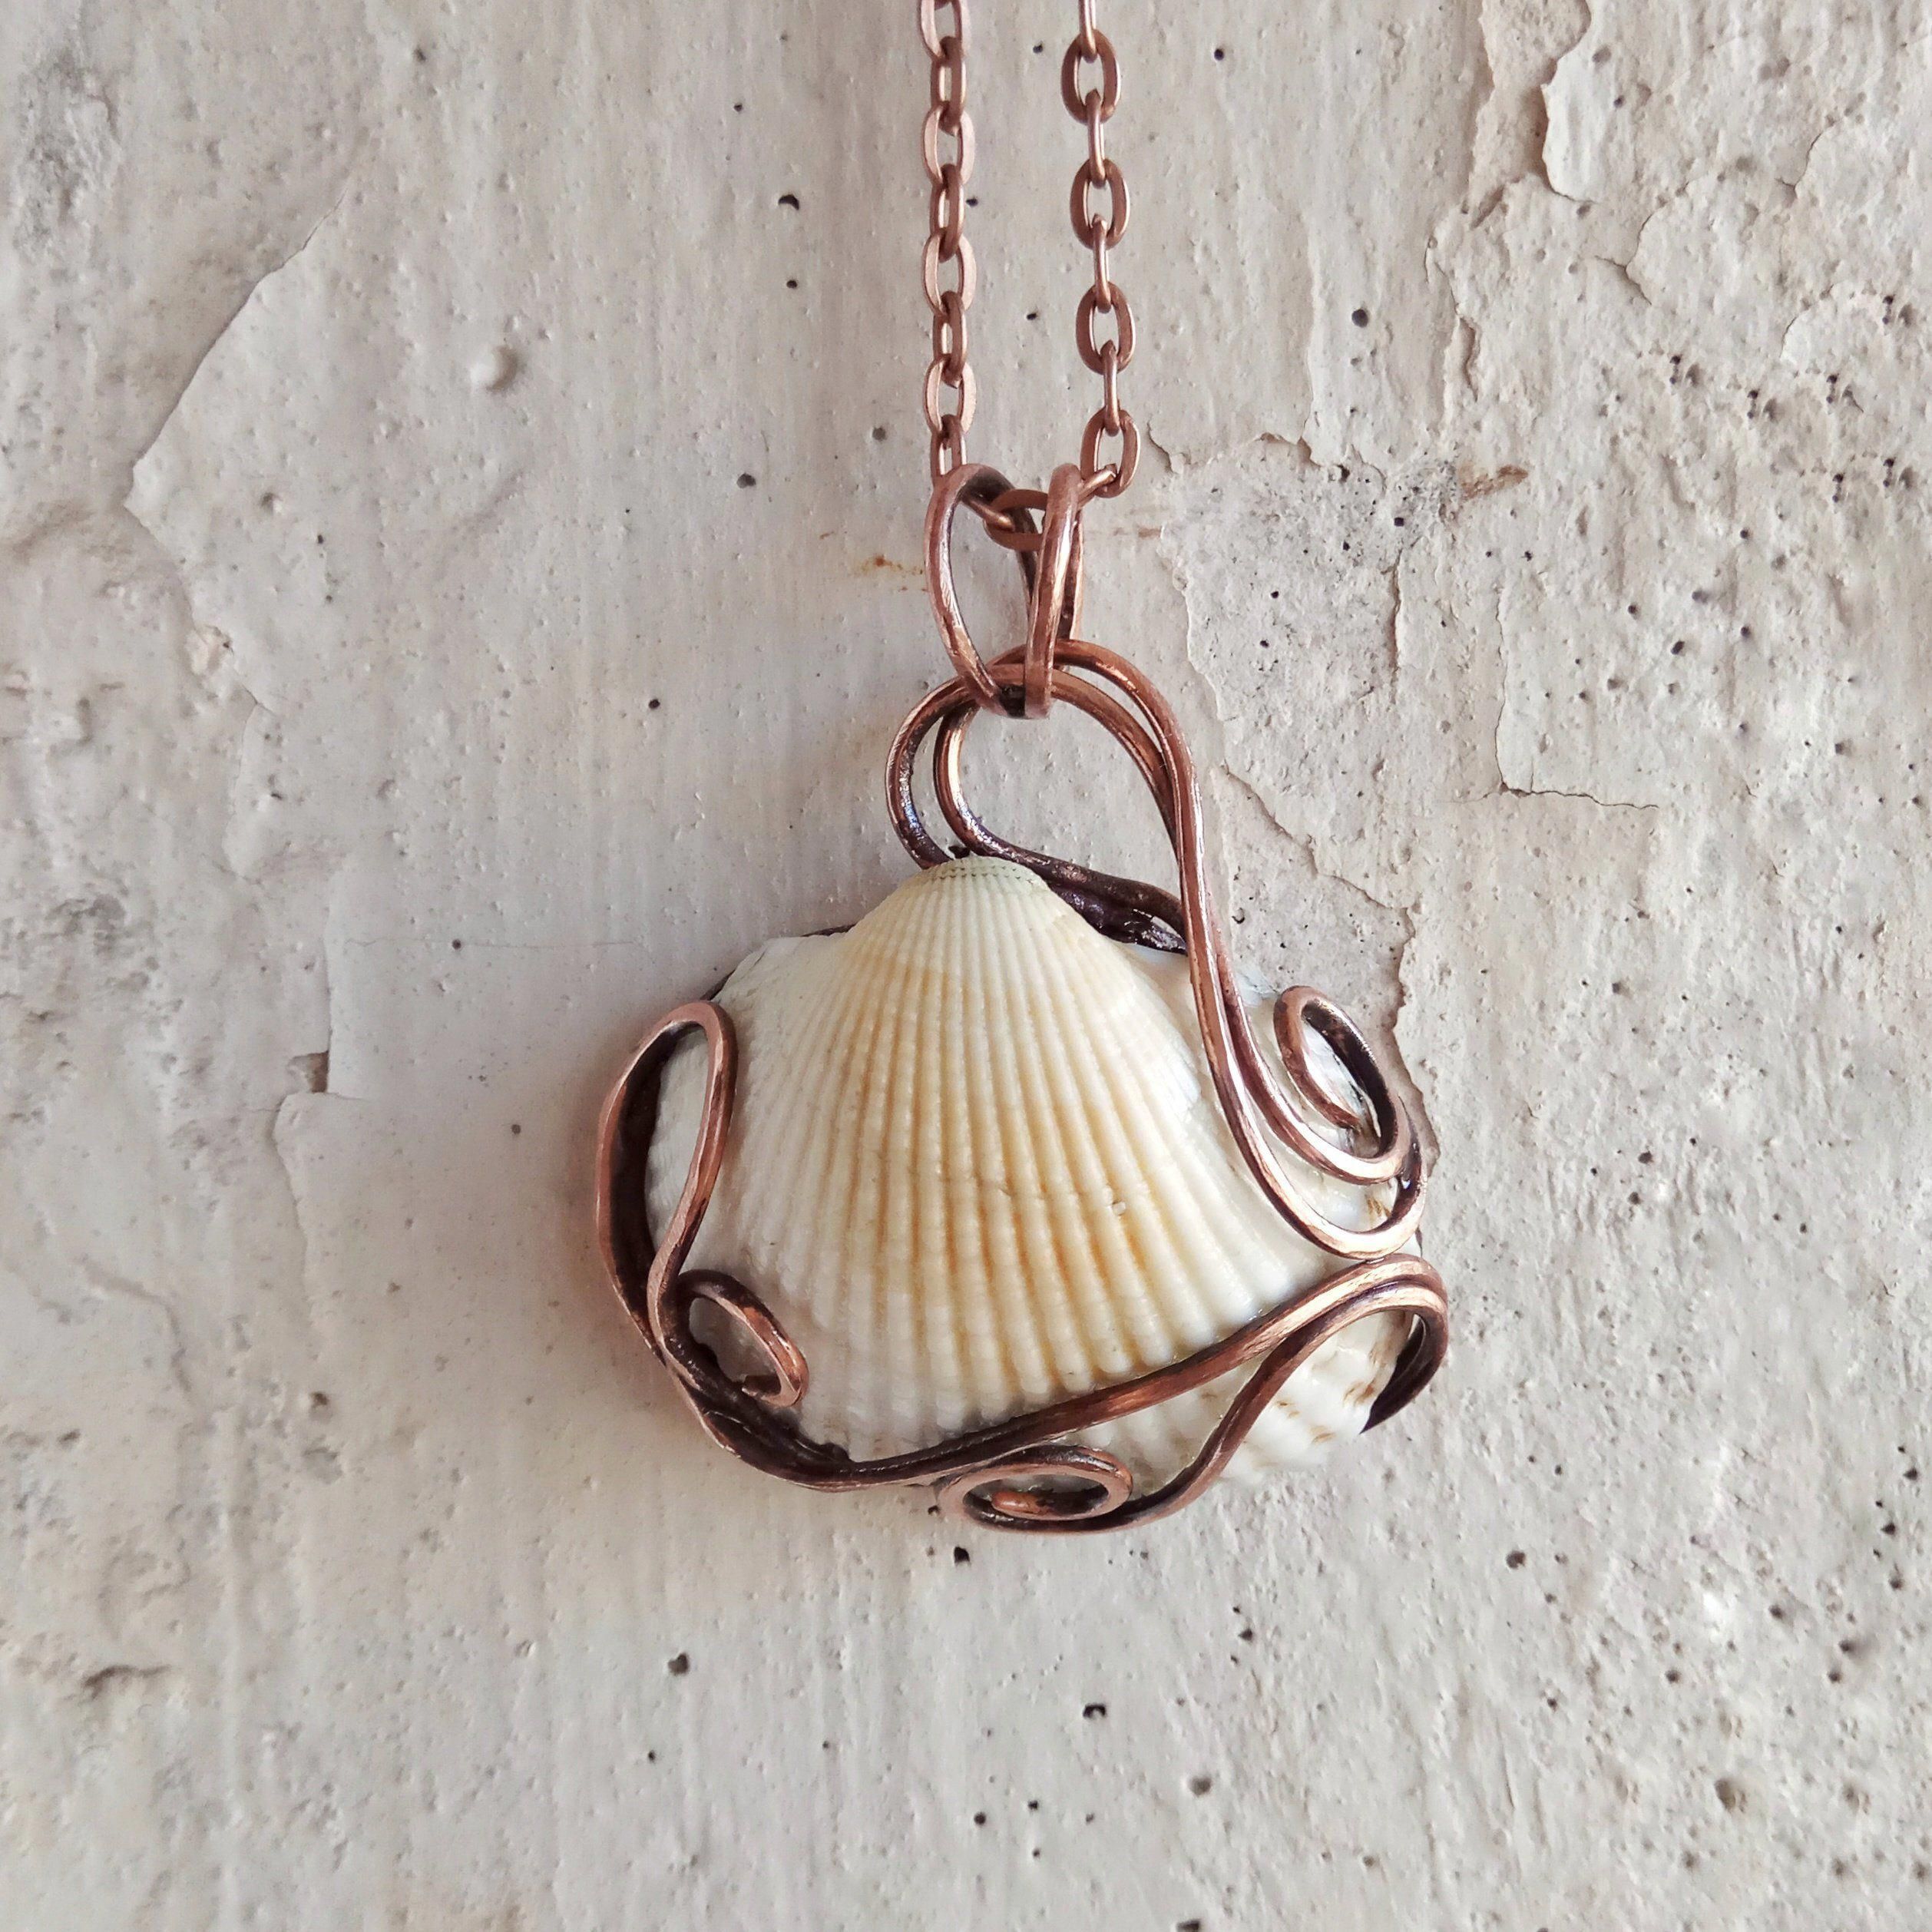 Copper sea shell necklace Wire wrap mermaid pendant Copper wire wrapped jewelry Gift for sister Gift for girlfriend Seashell boho necklace - Copper sea shell necklace Wire wrap mermaid pendant Copper wire wrapped jewelry Gift for sister Gift for girlfriend Seashell boho necklace -   18 diy Jewelry pendants ideas